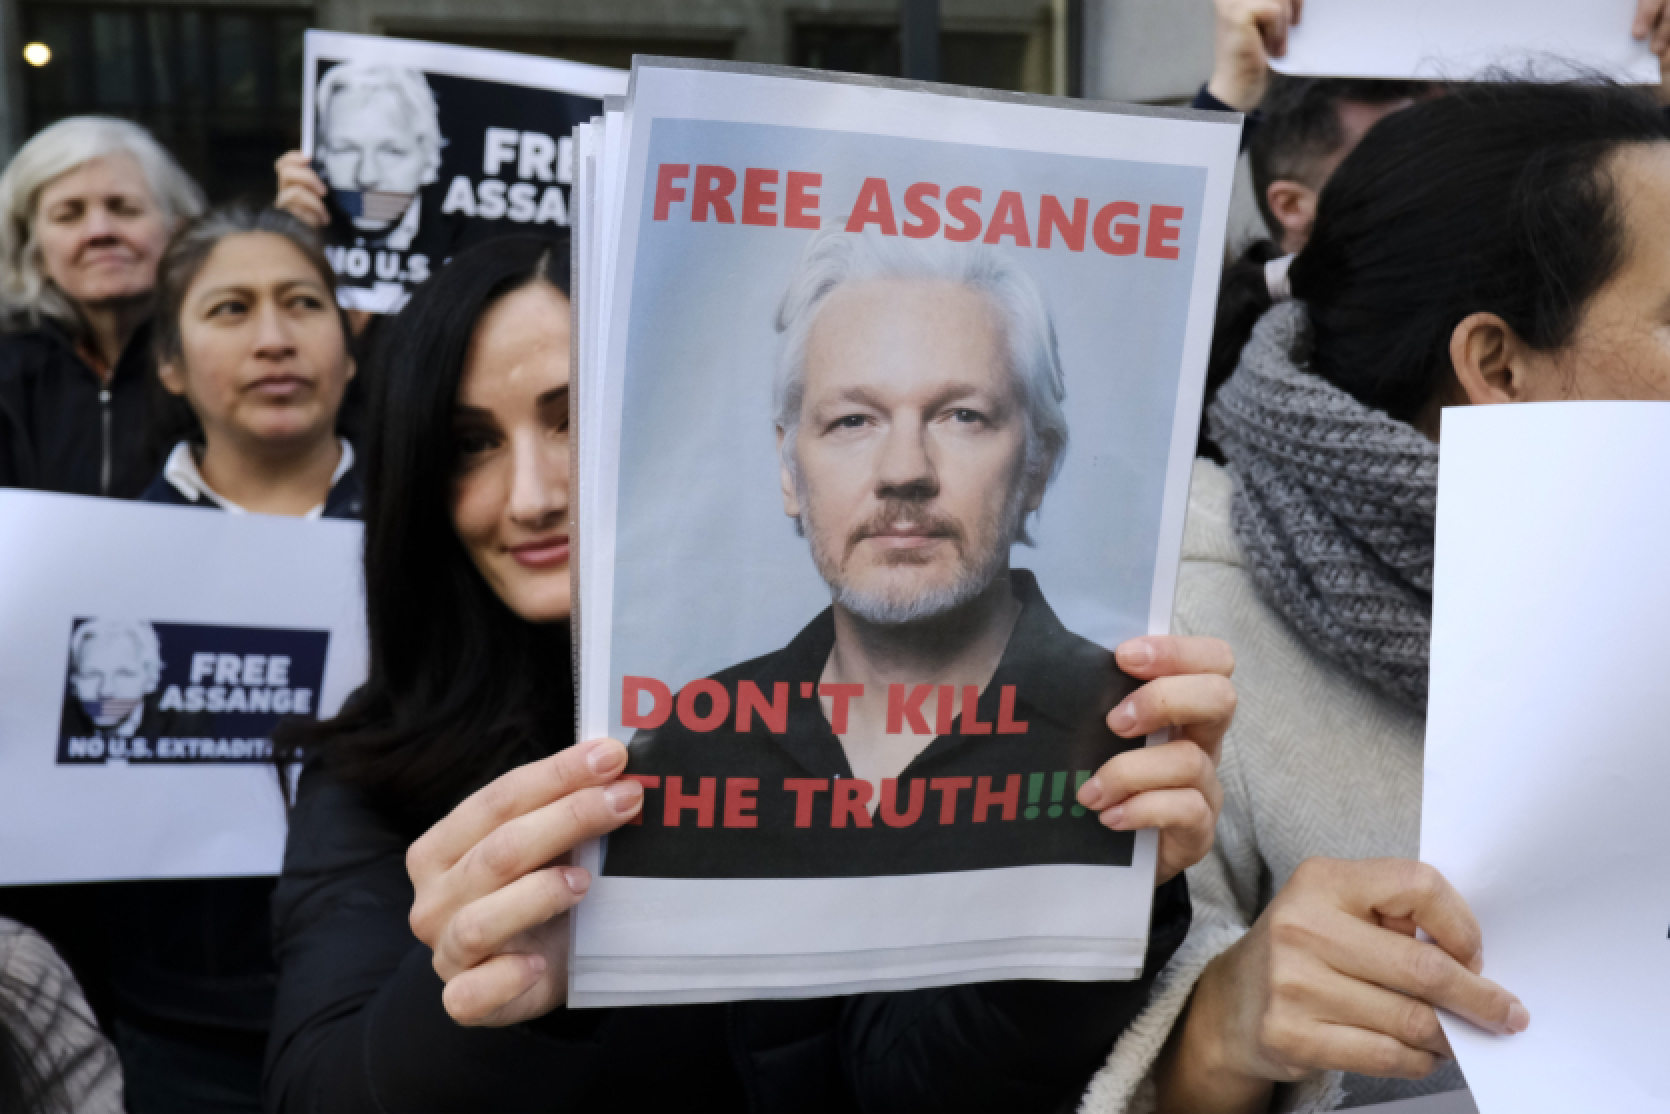 "Wikipedia Uncensored" founder Julian Assange is out of jail after "14 years of court battles" over leaking US military secrets